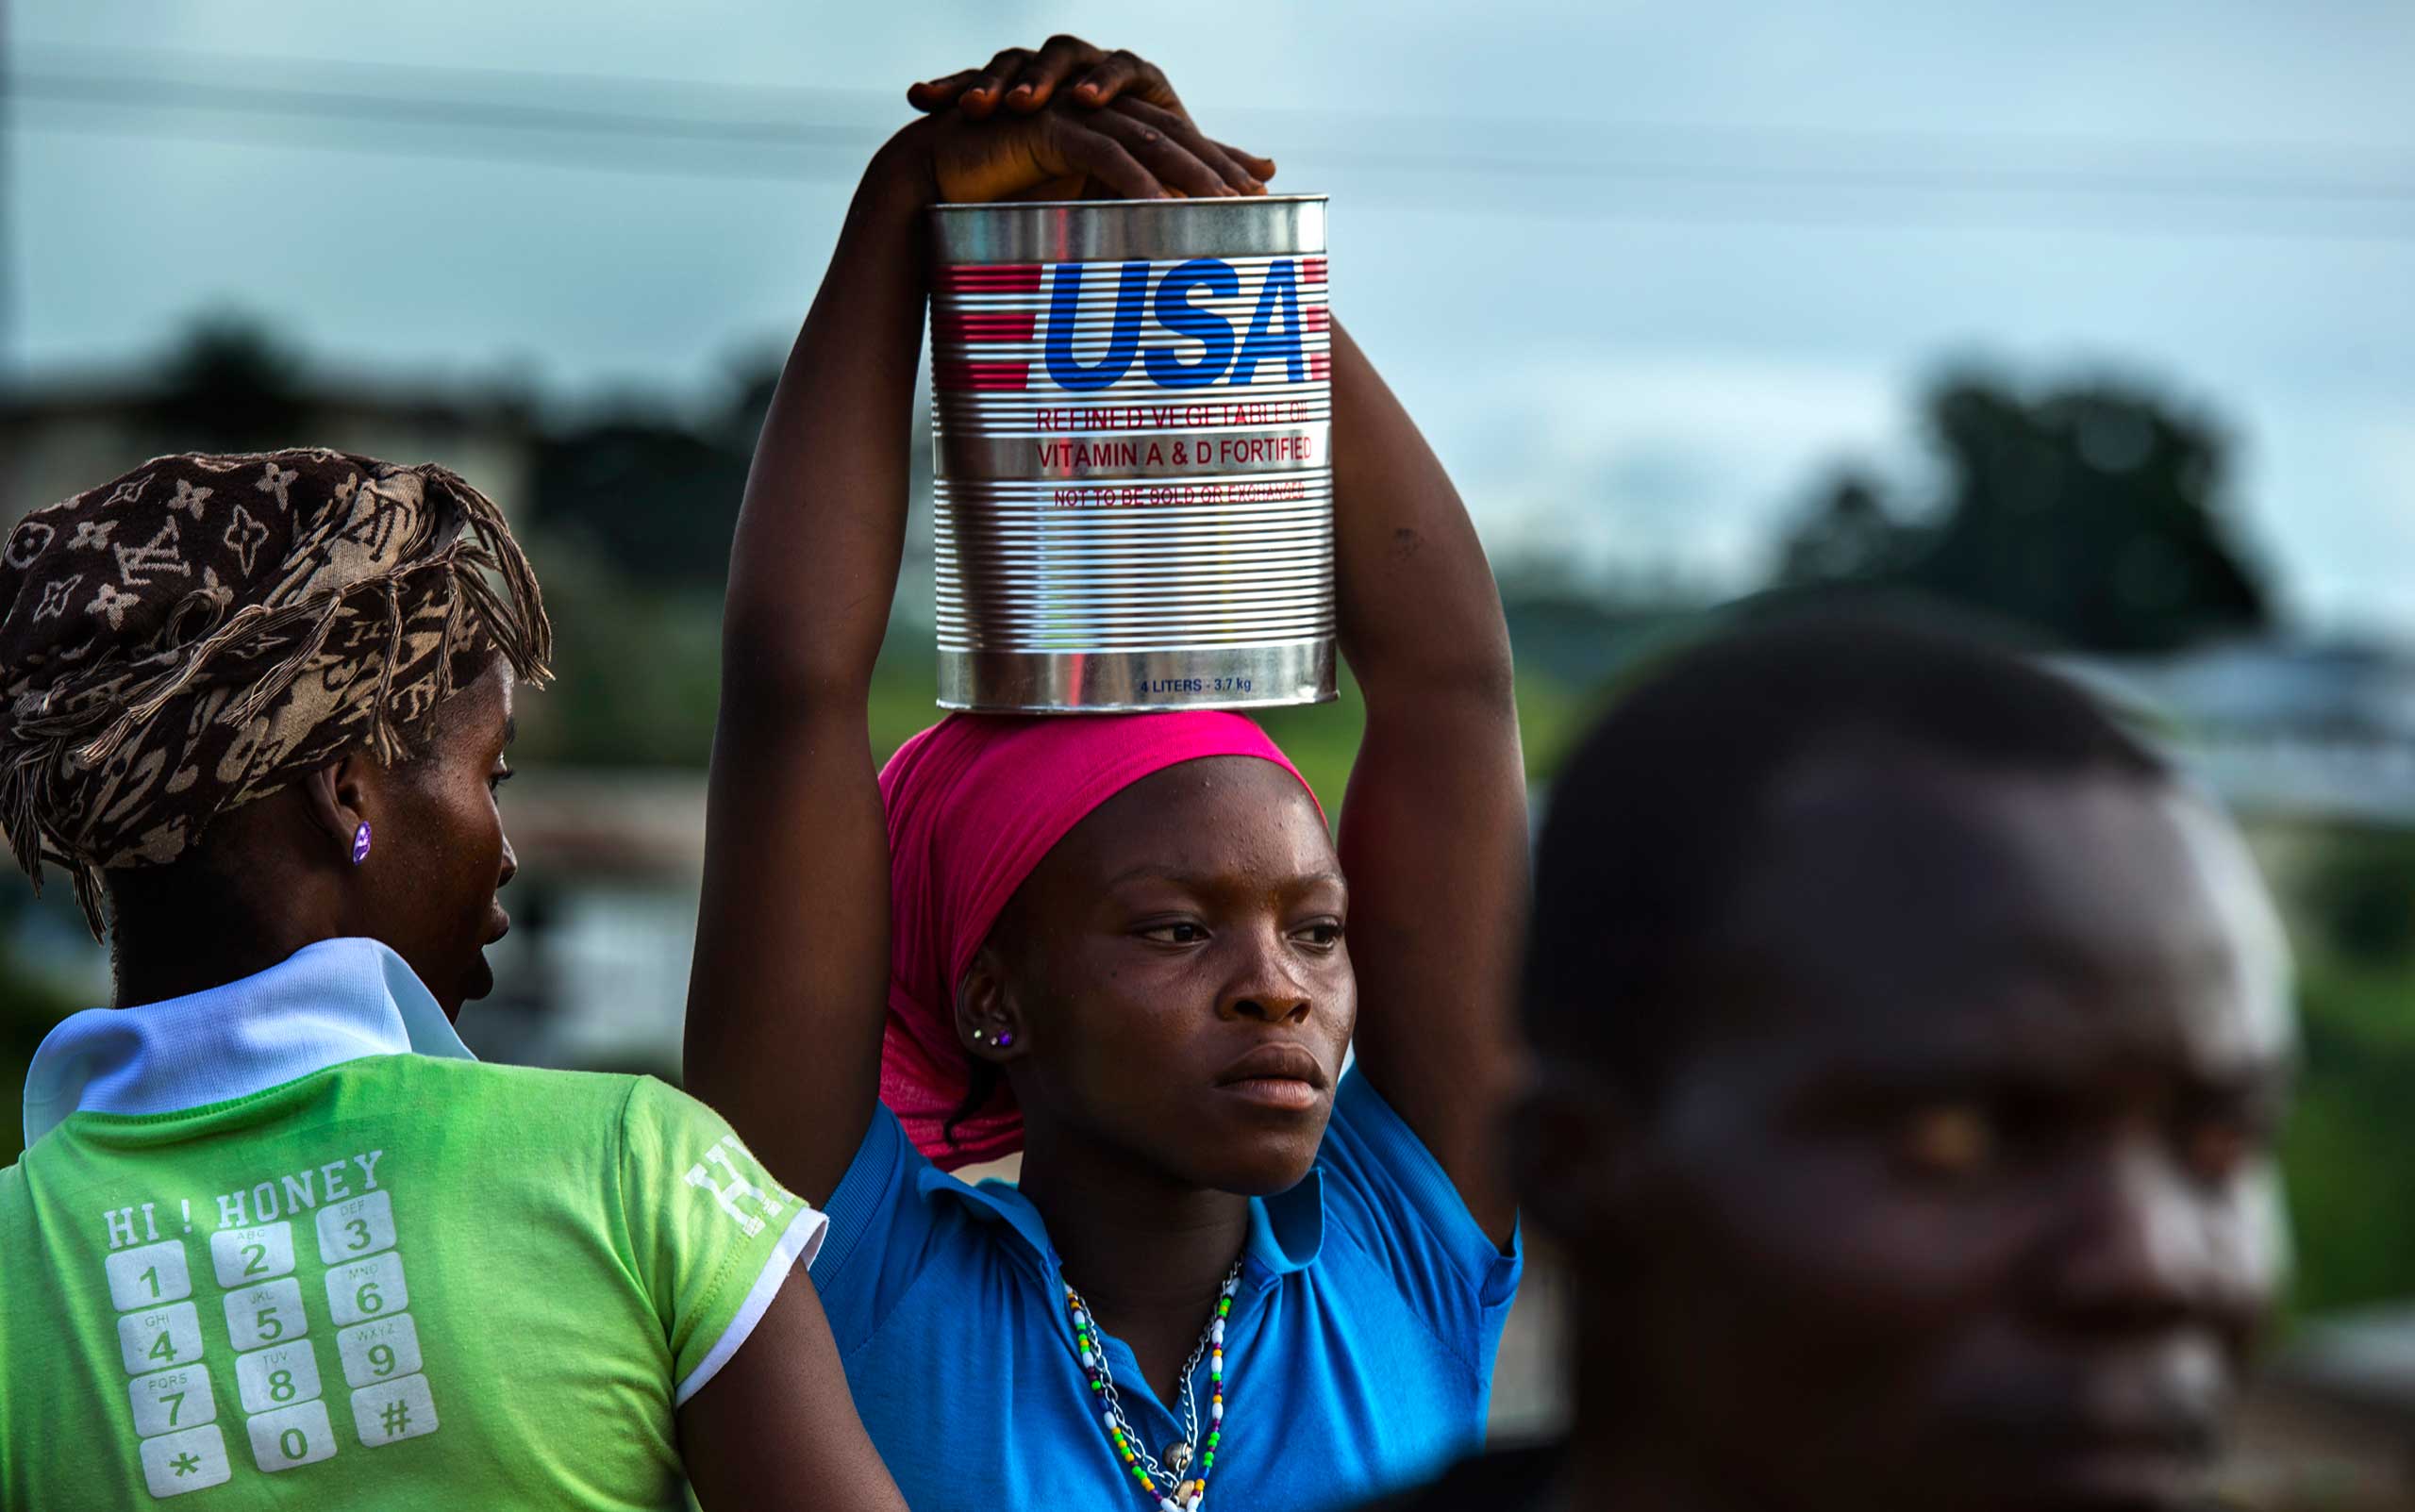 Mbolowilee Kollie, 17, waits with a can of cooking oil after her family received their share of food items from WFP's food distribution on Nov. 6, 2014 in Kolba City, Liberia.